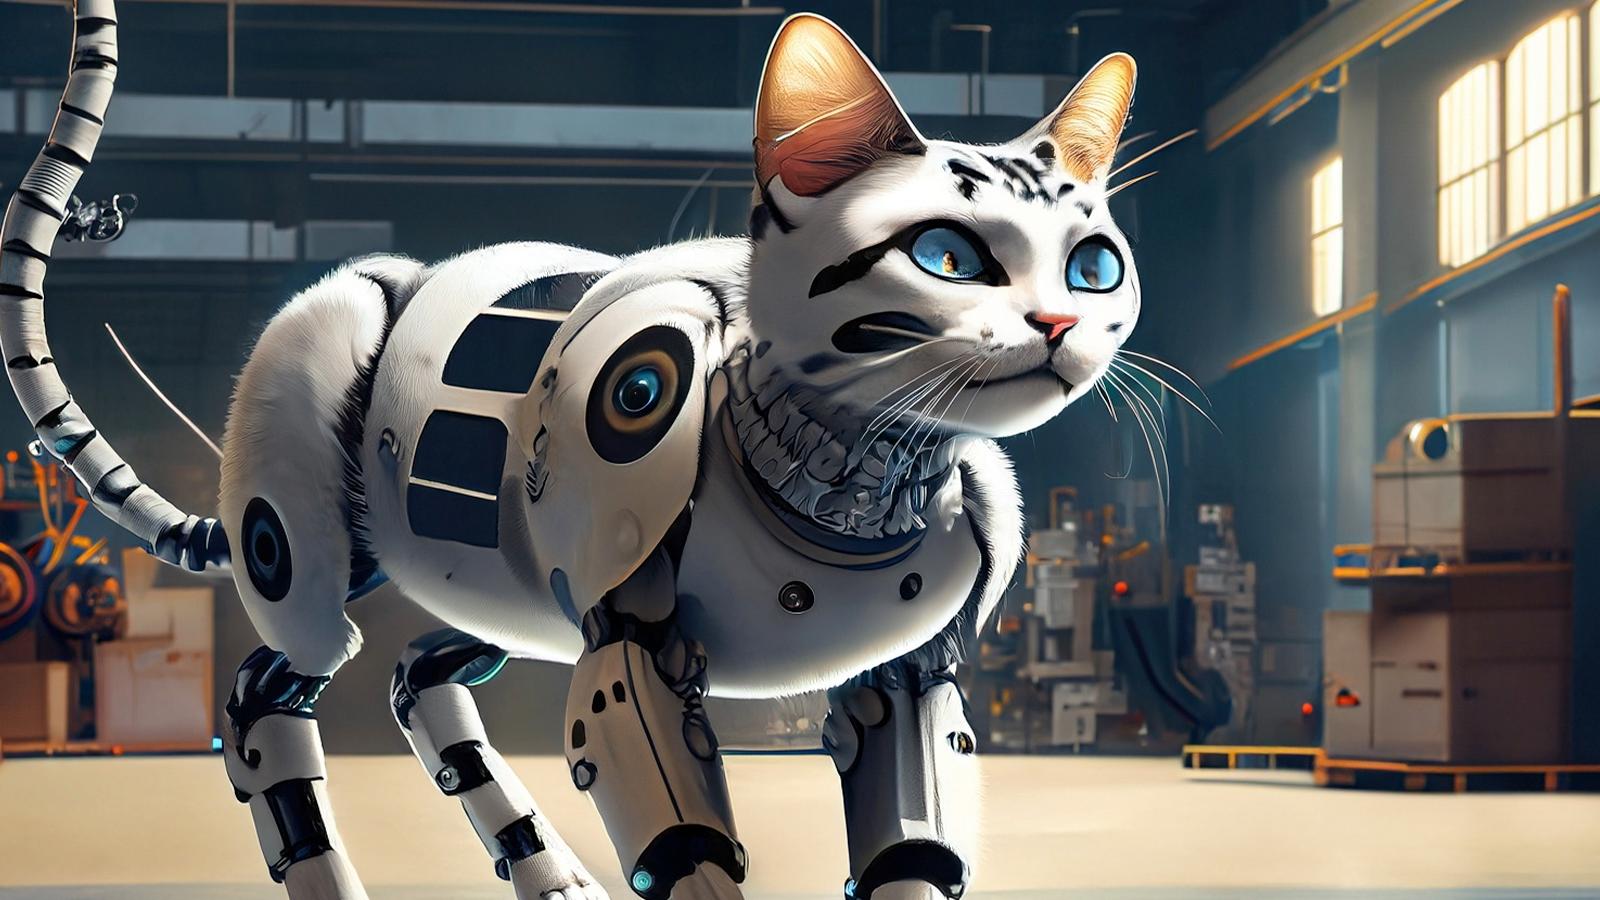 RoboCat robot cat made with adobe firefly